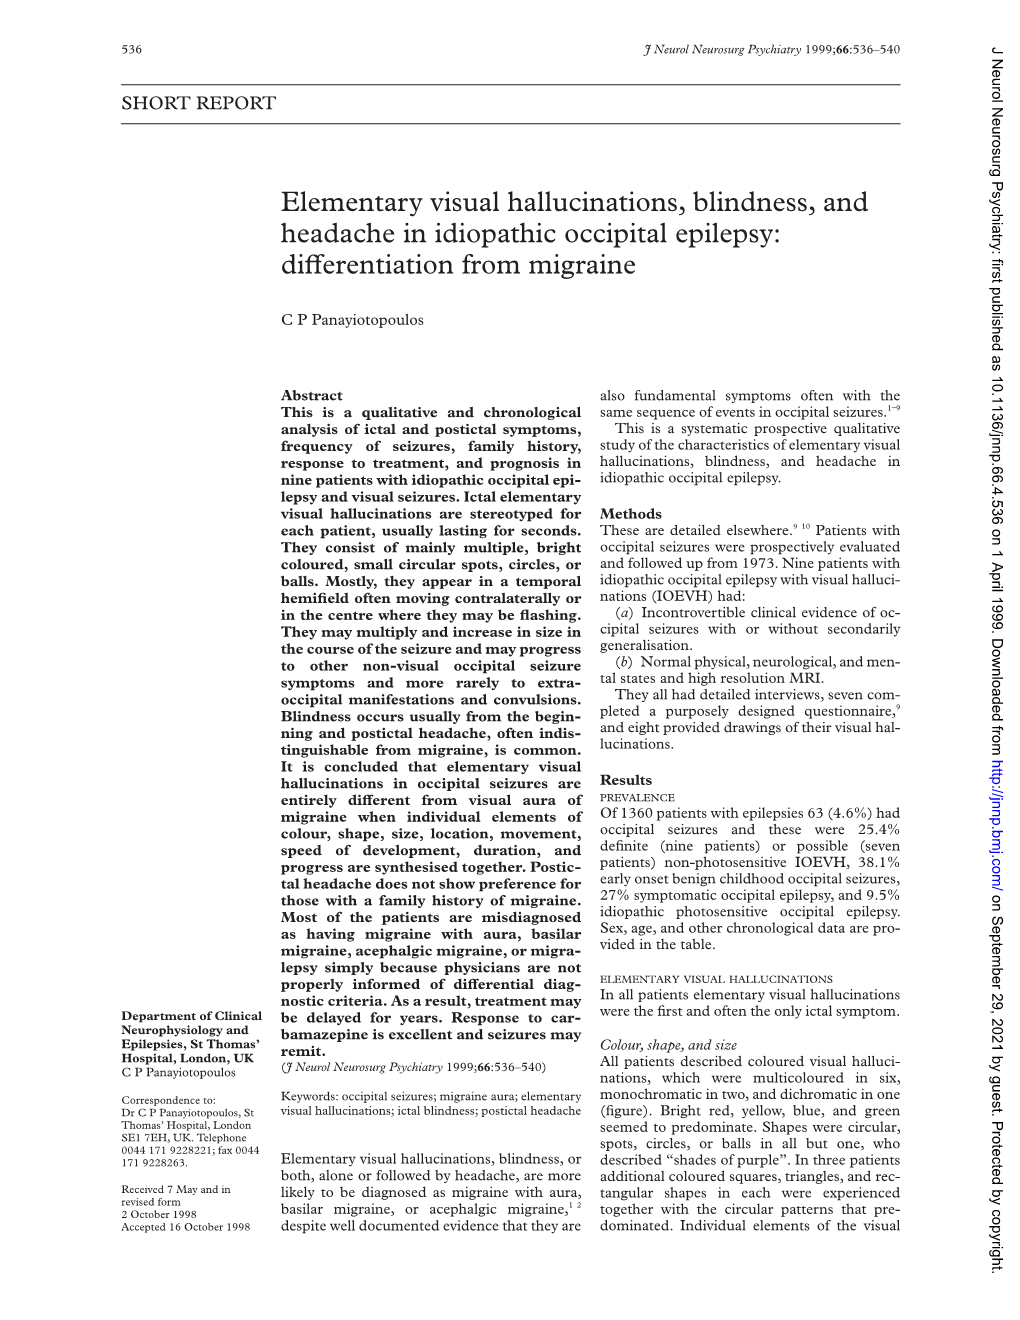 Elementary Visual Hallucinations, Blindness, and Headache in Idiopathic Occipital Epilepsy: Diverentiation from Migraine